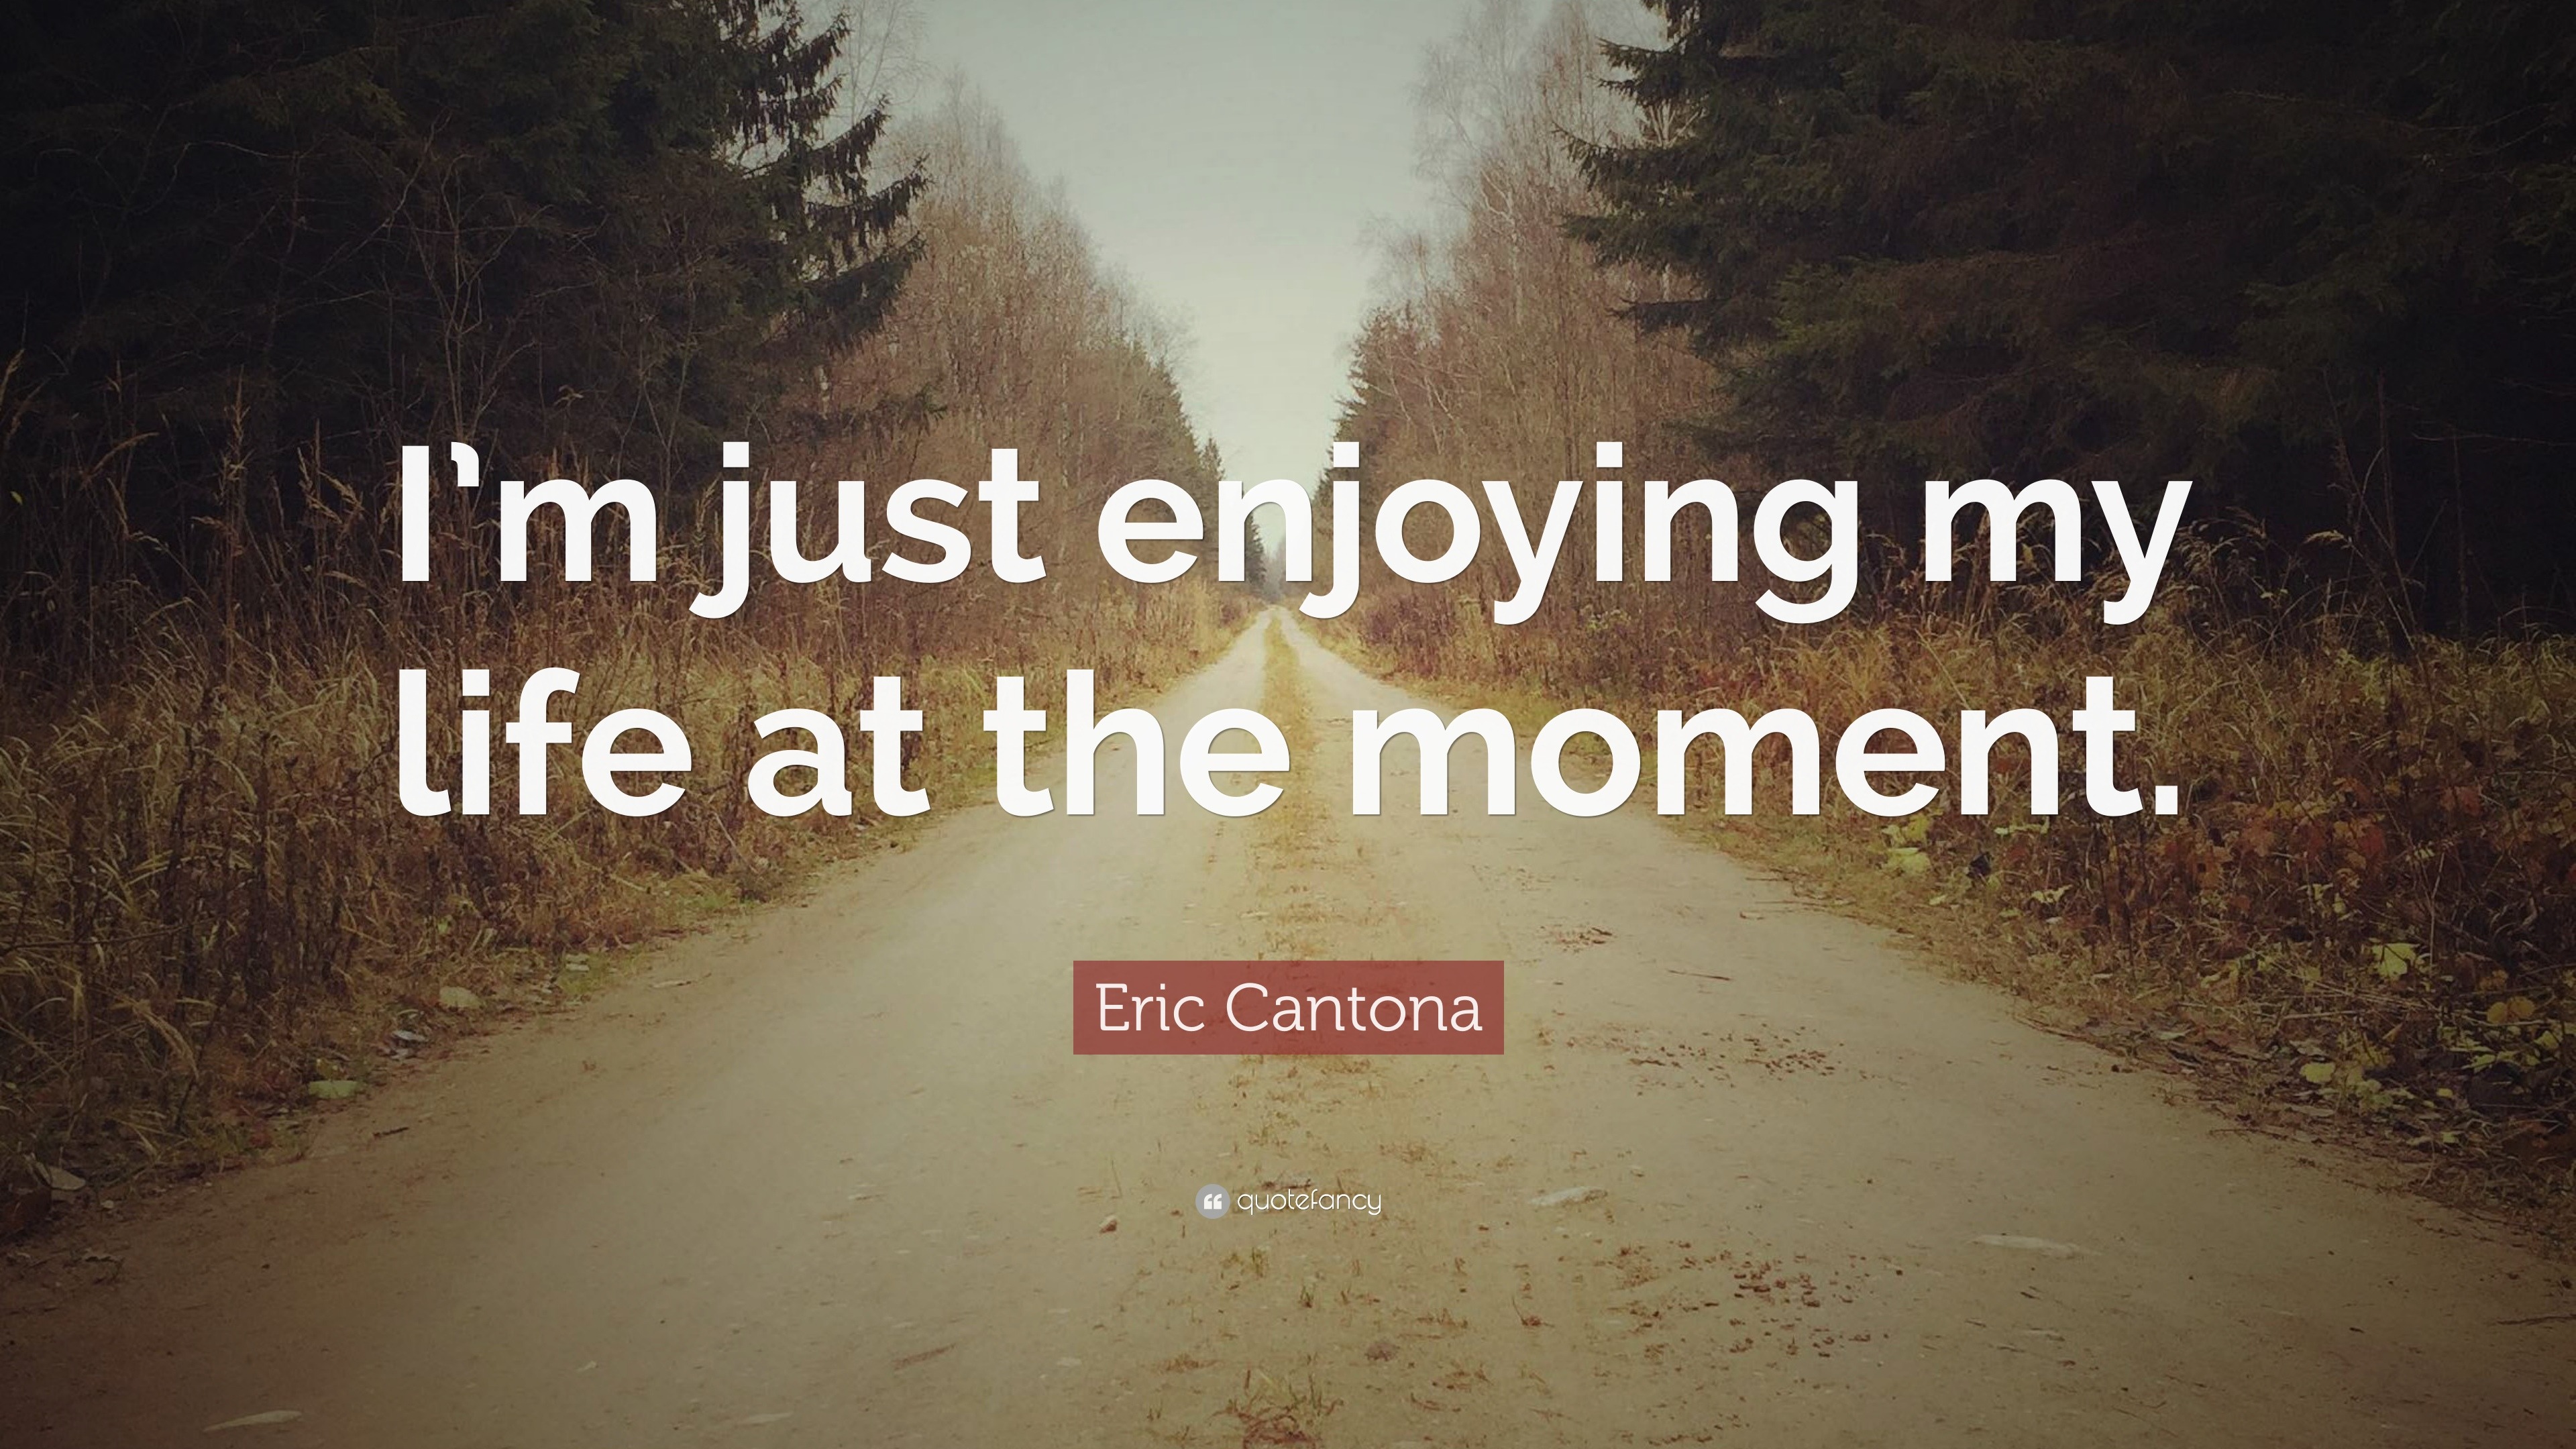 Eric Cantona Quote: “I'm just enjoying my life at the moment.”